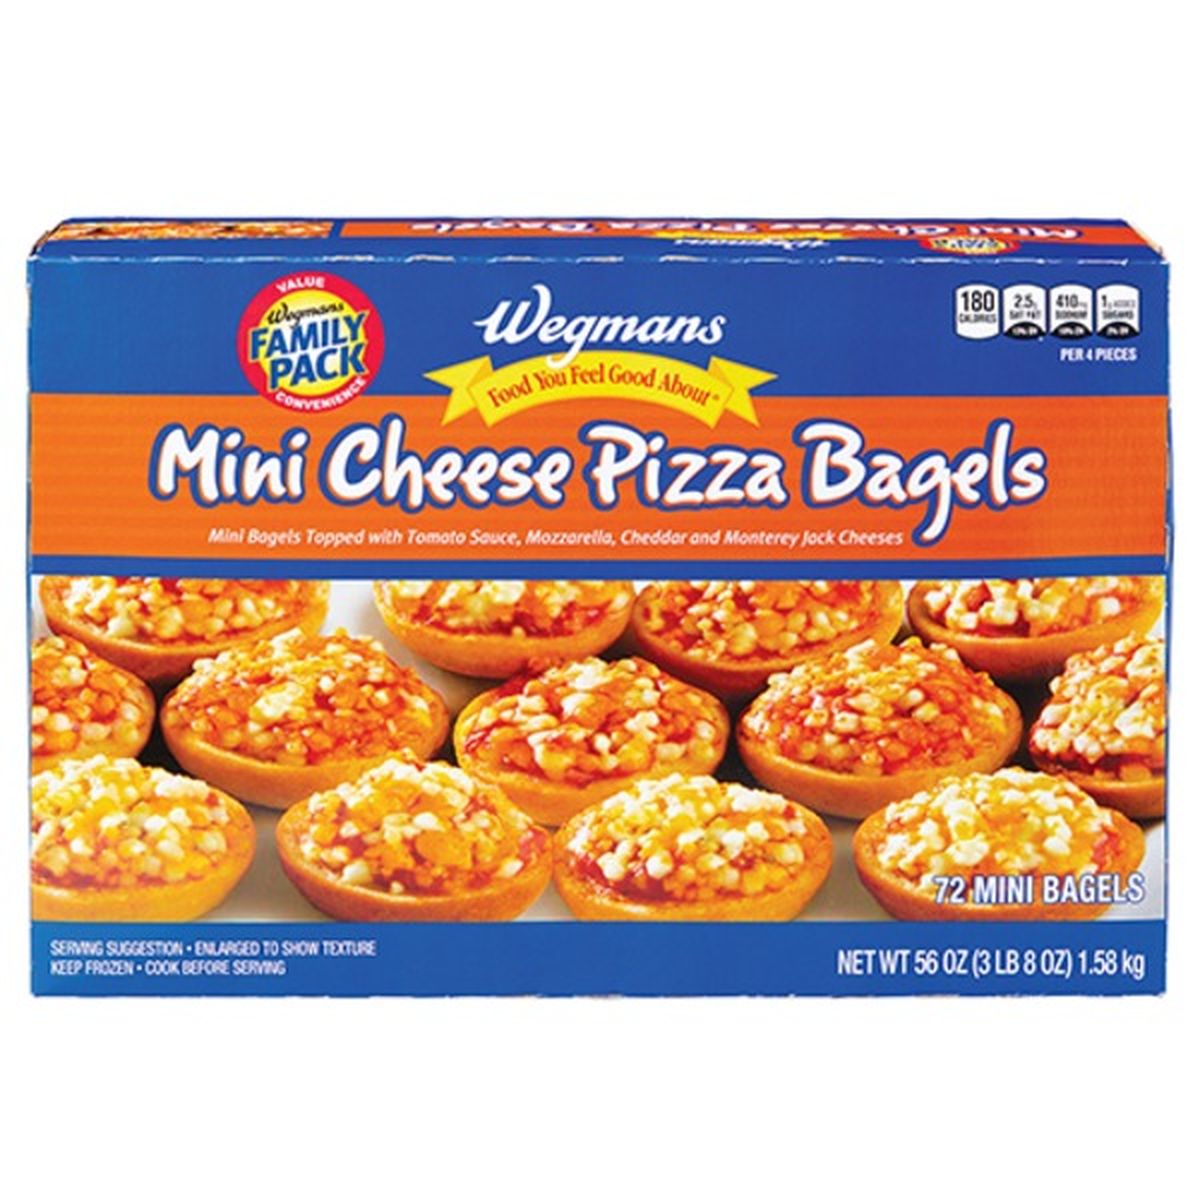 Calories in Wegmans Mini Cheese Pizza Bagels, FAMILY PACK